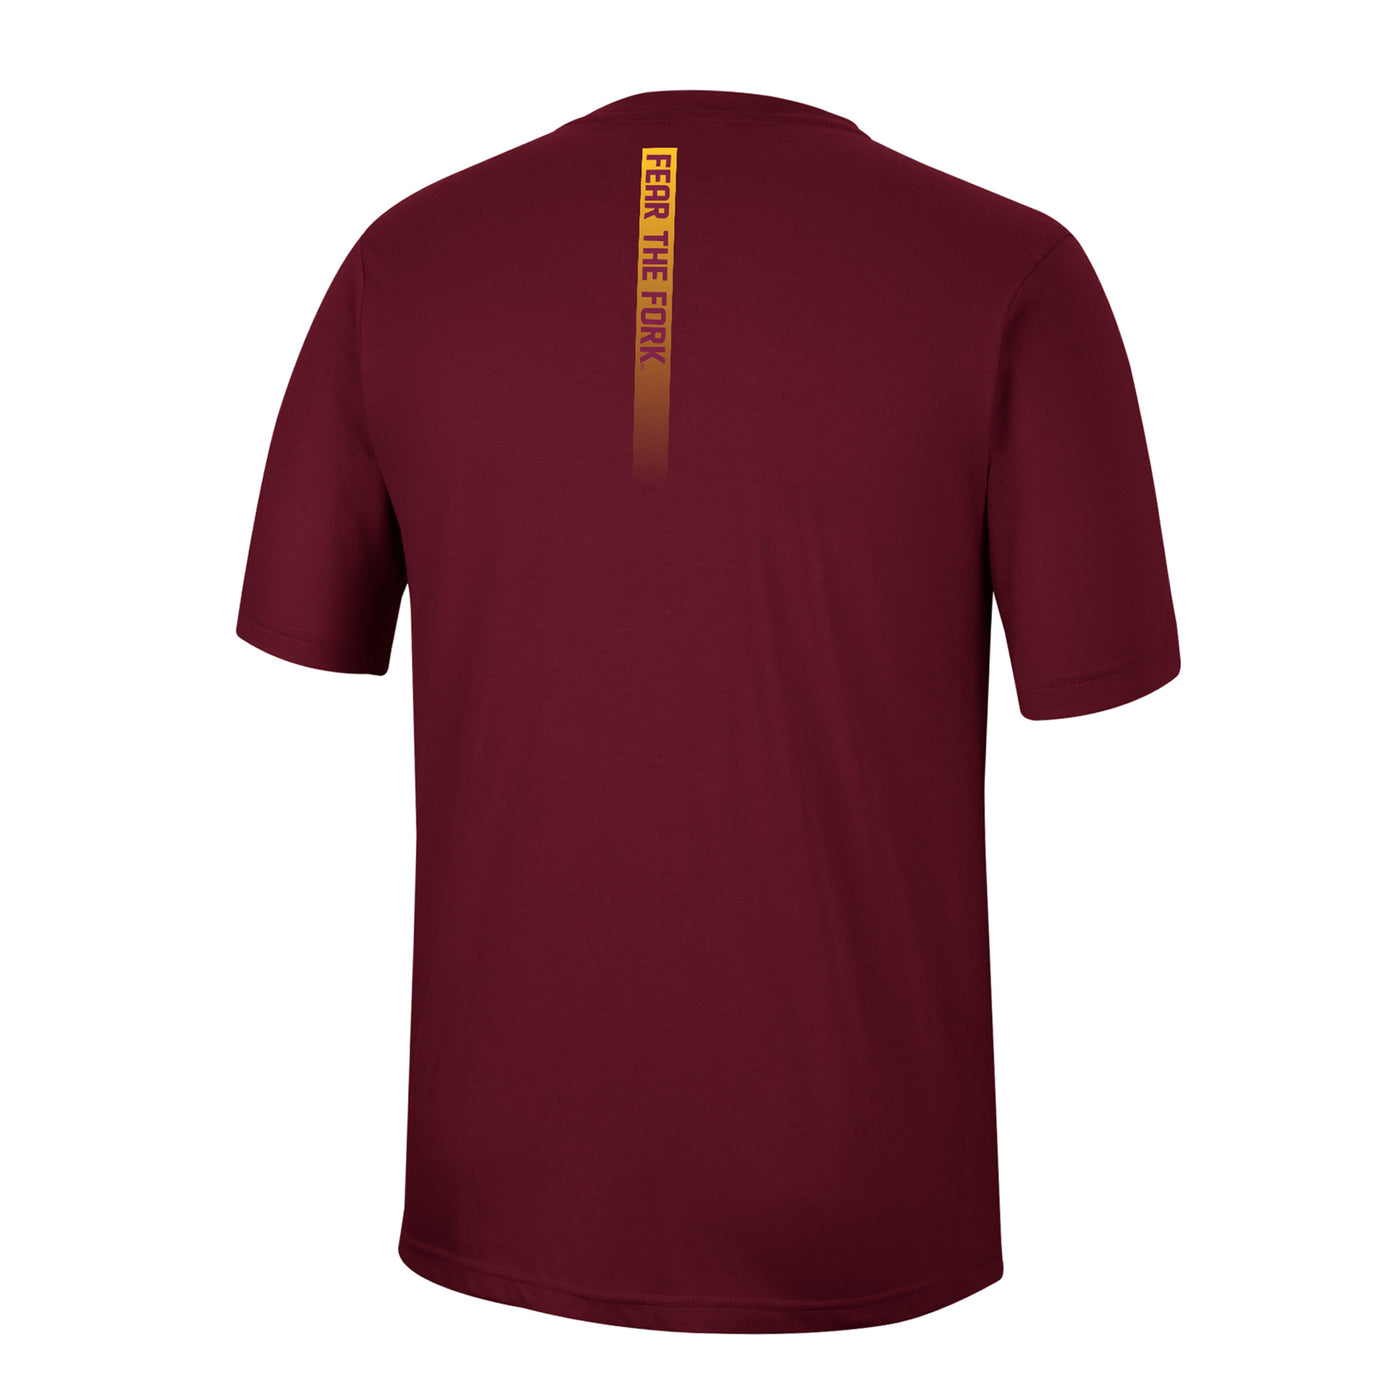 ASU maroon shirt with 'Fear the Fork' vertically down the back in a gold block